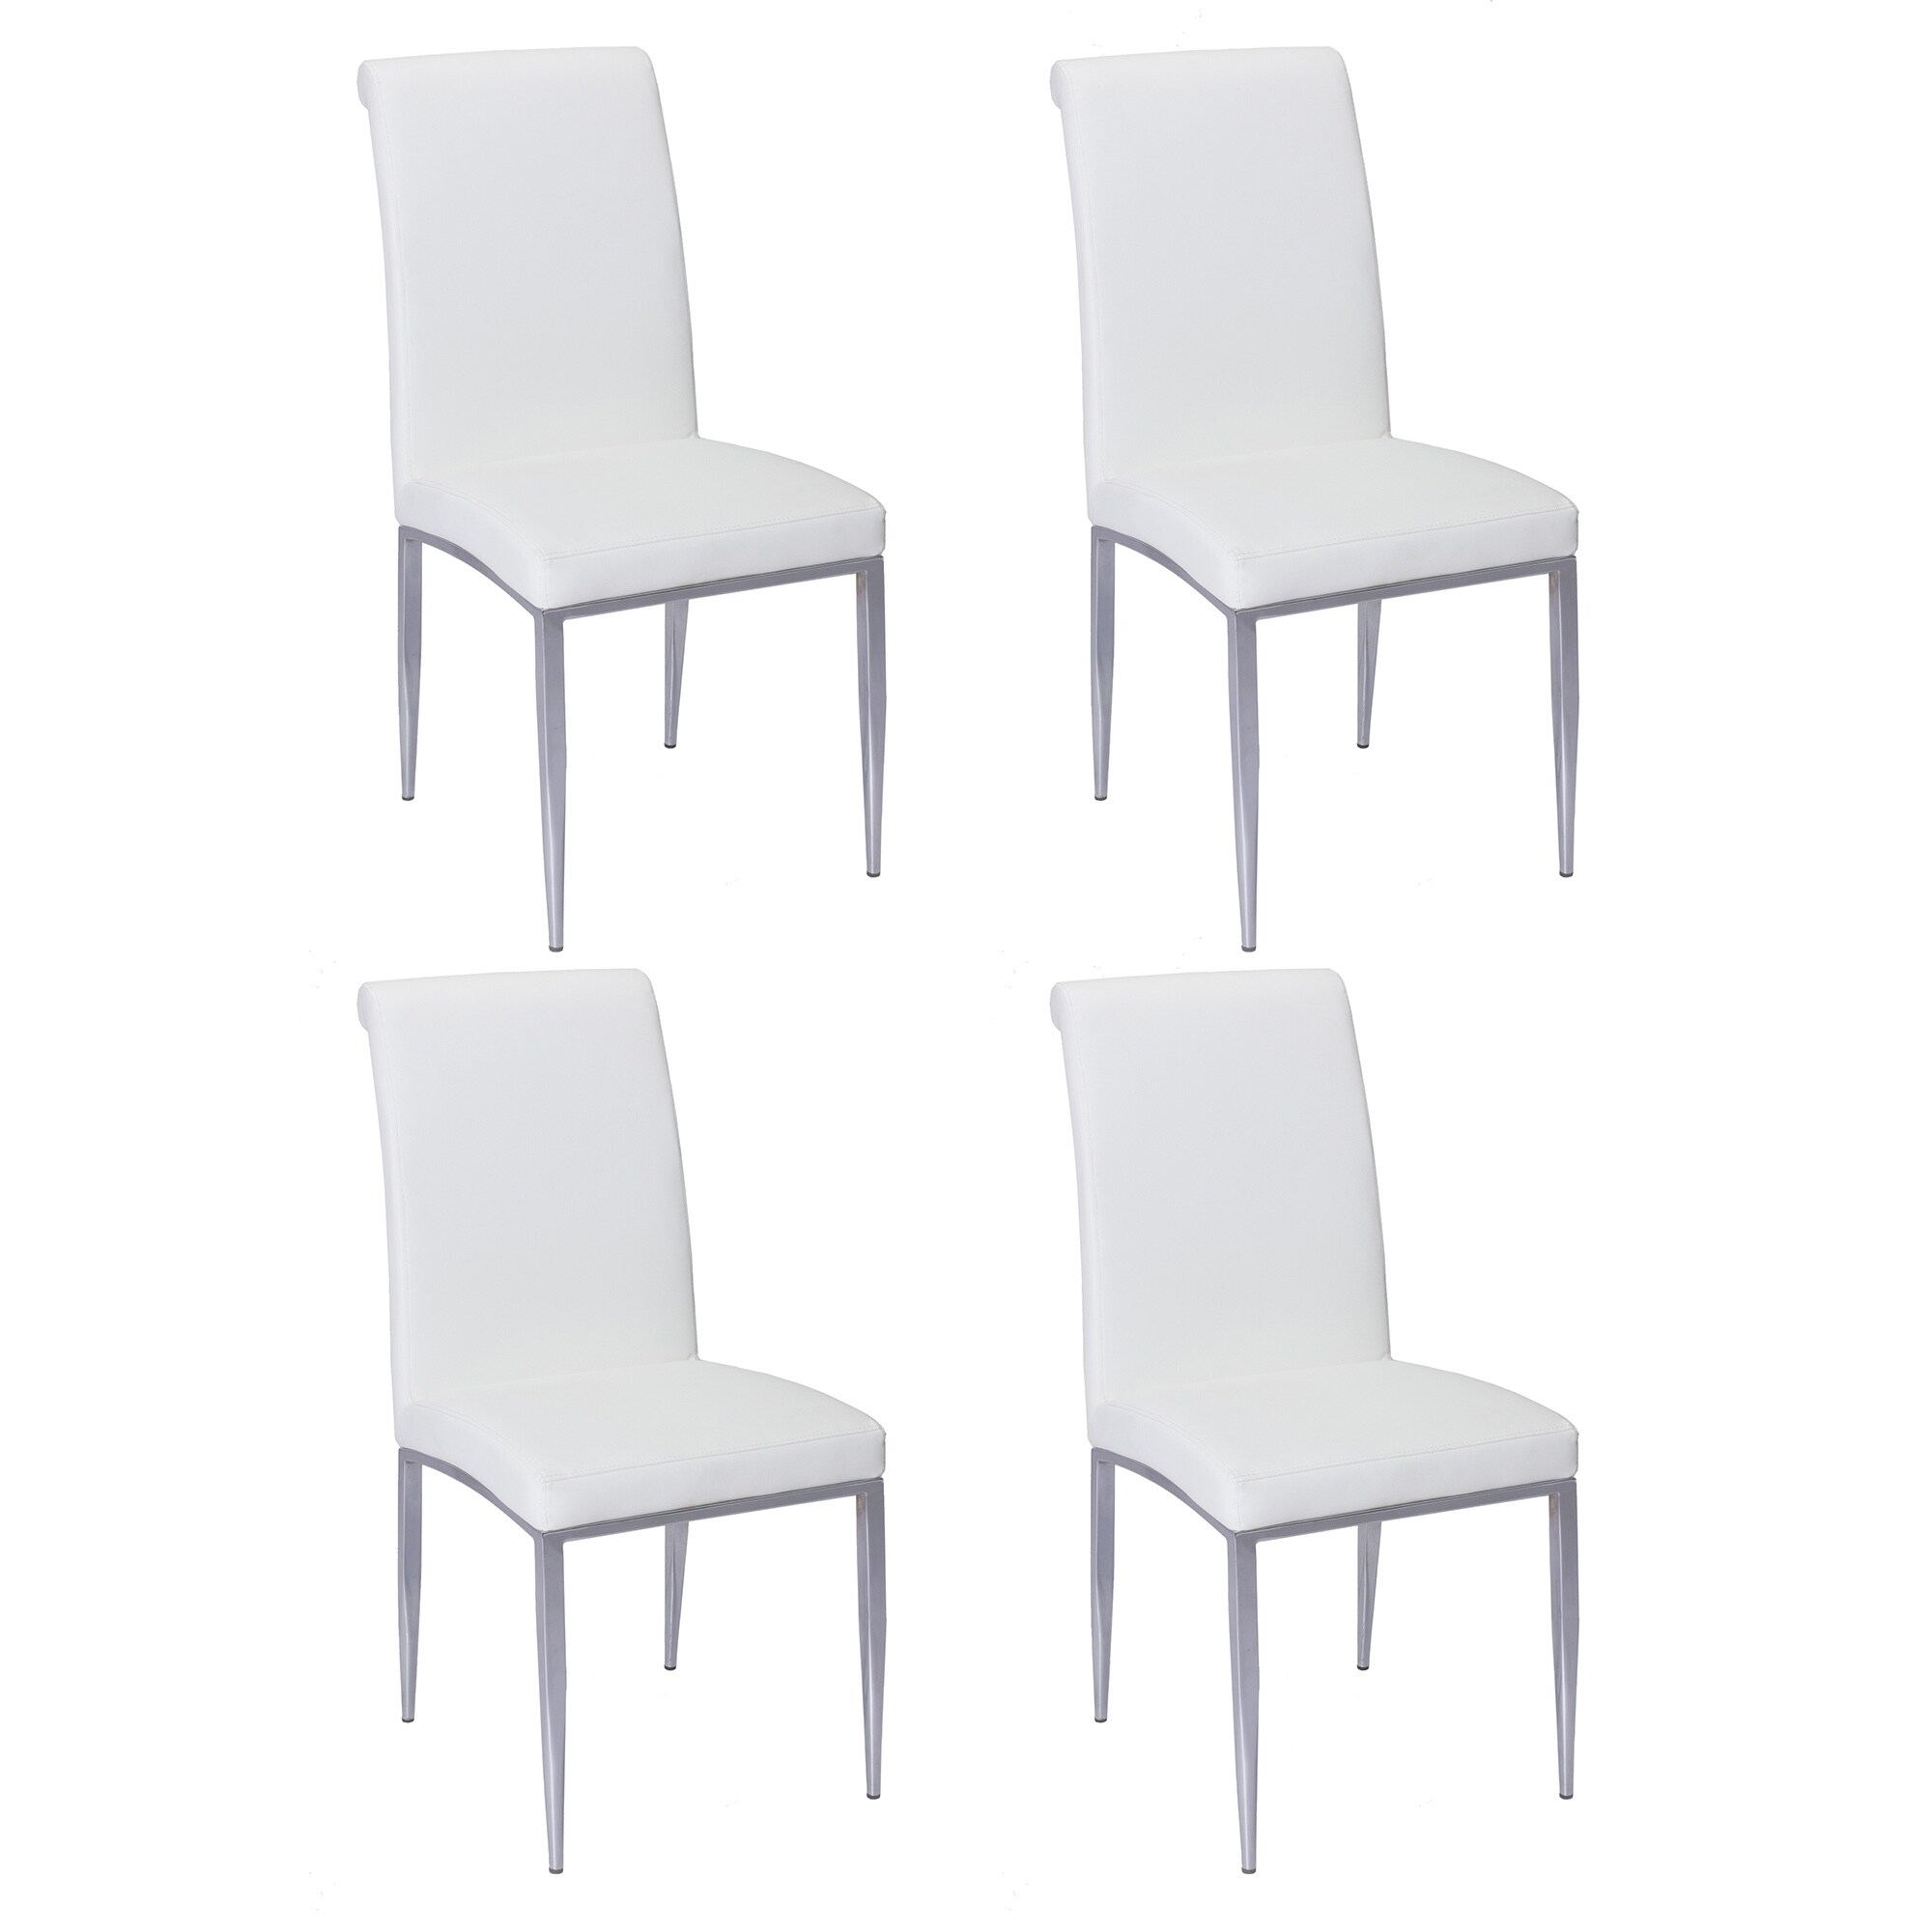 Somette Contemporary Upholstered Cantilever Side Chair, Set of 4